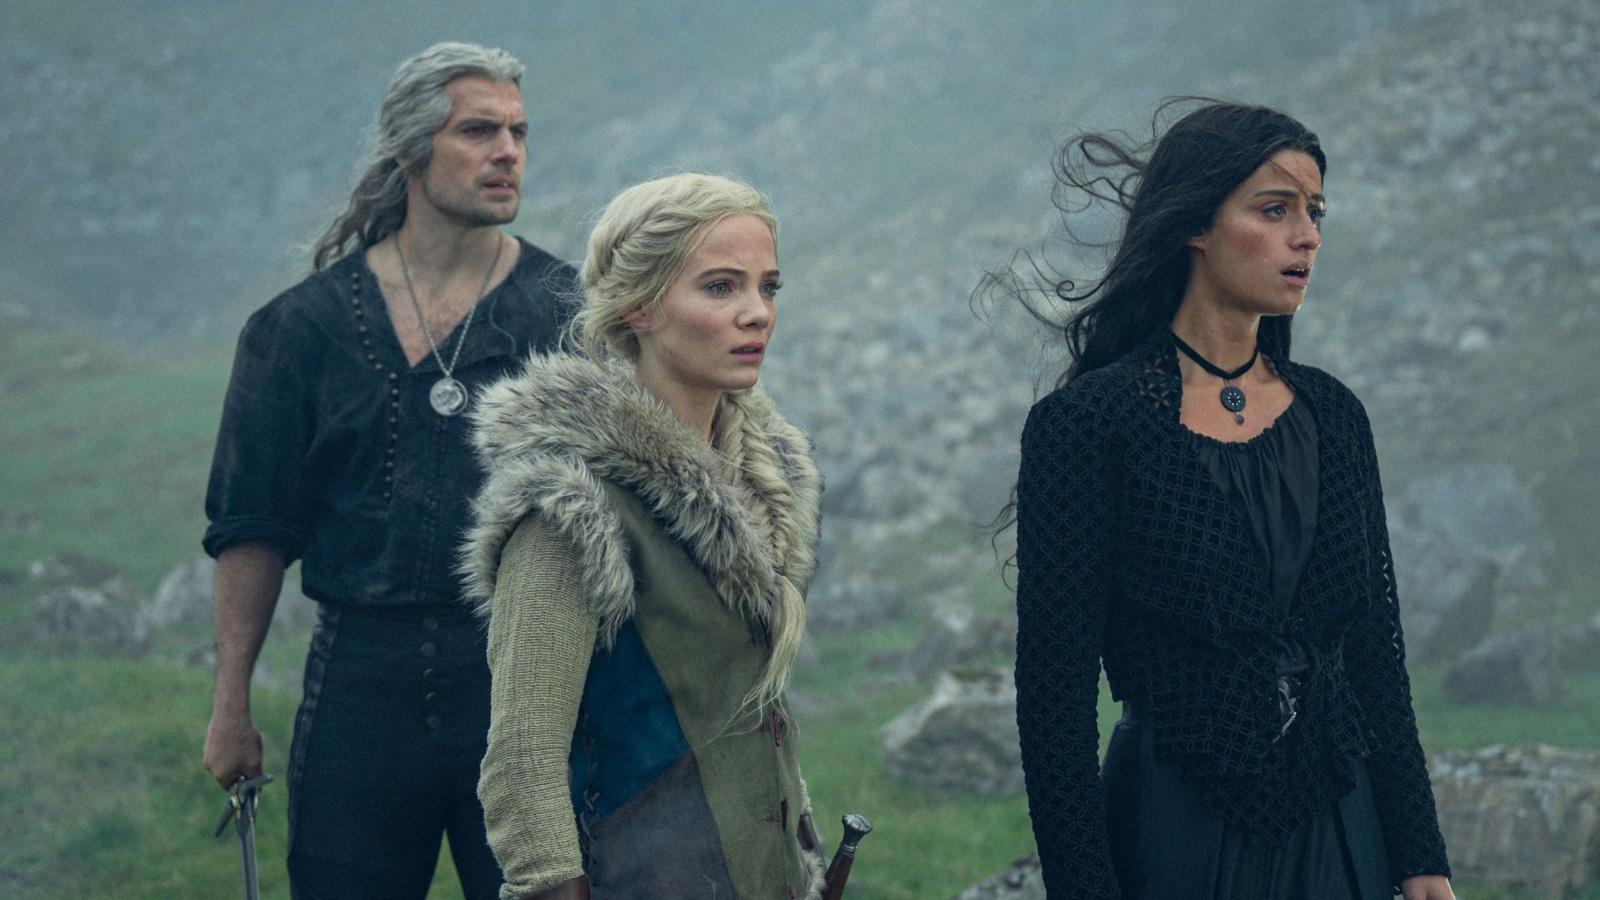 Henry Cavill, Freya Allan, and Anya Chalotra in The Witcher Season 3 finale.